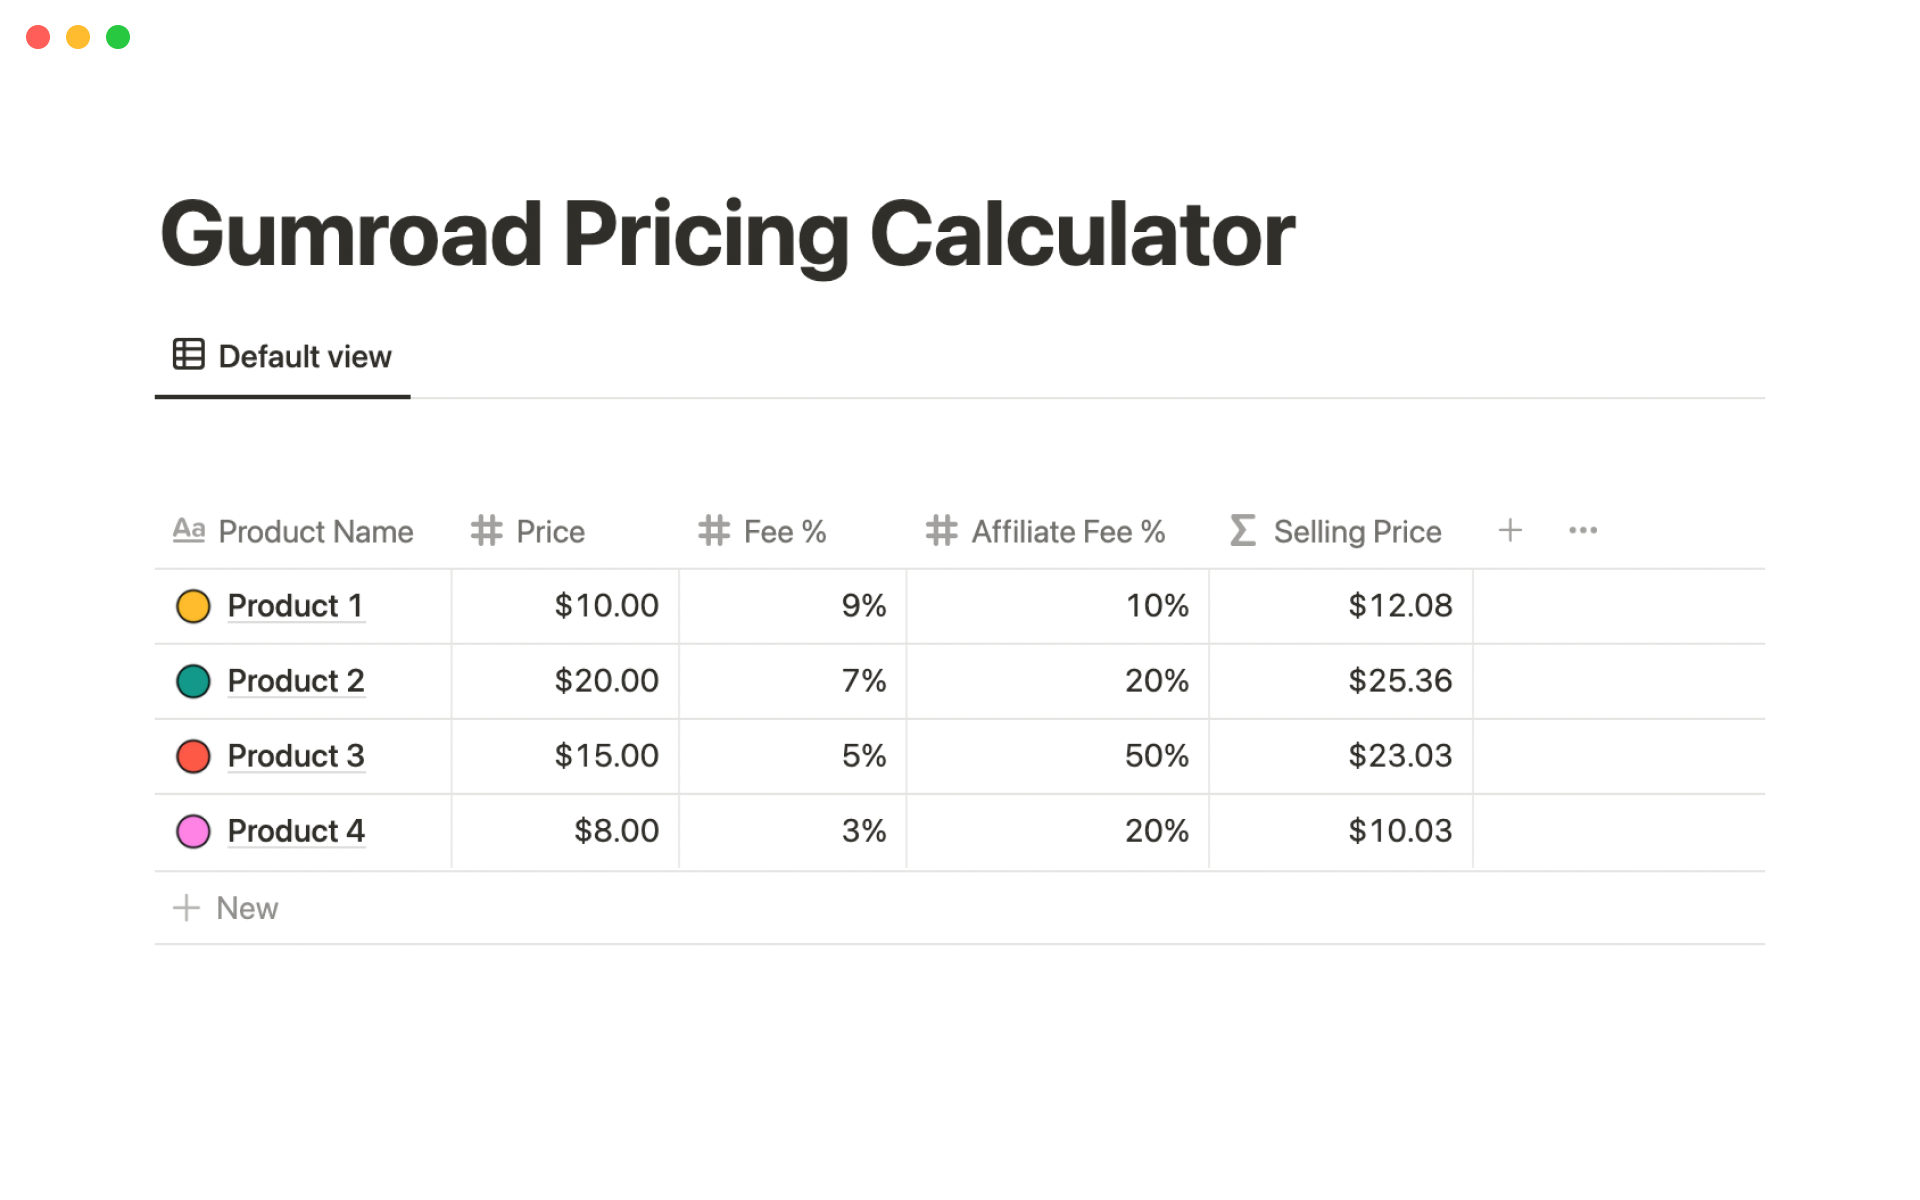 Calculate the final selling price of your Gumroad product.